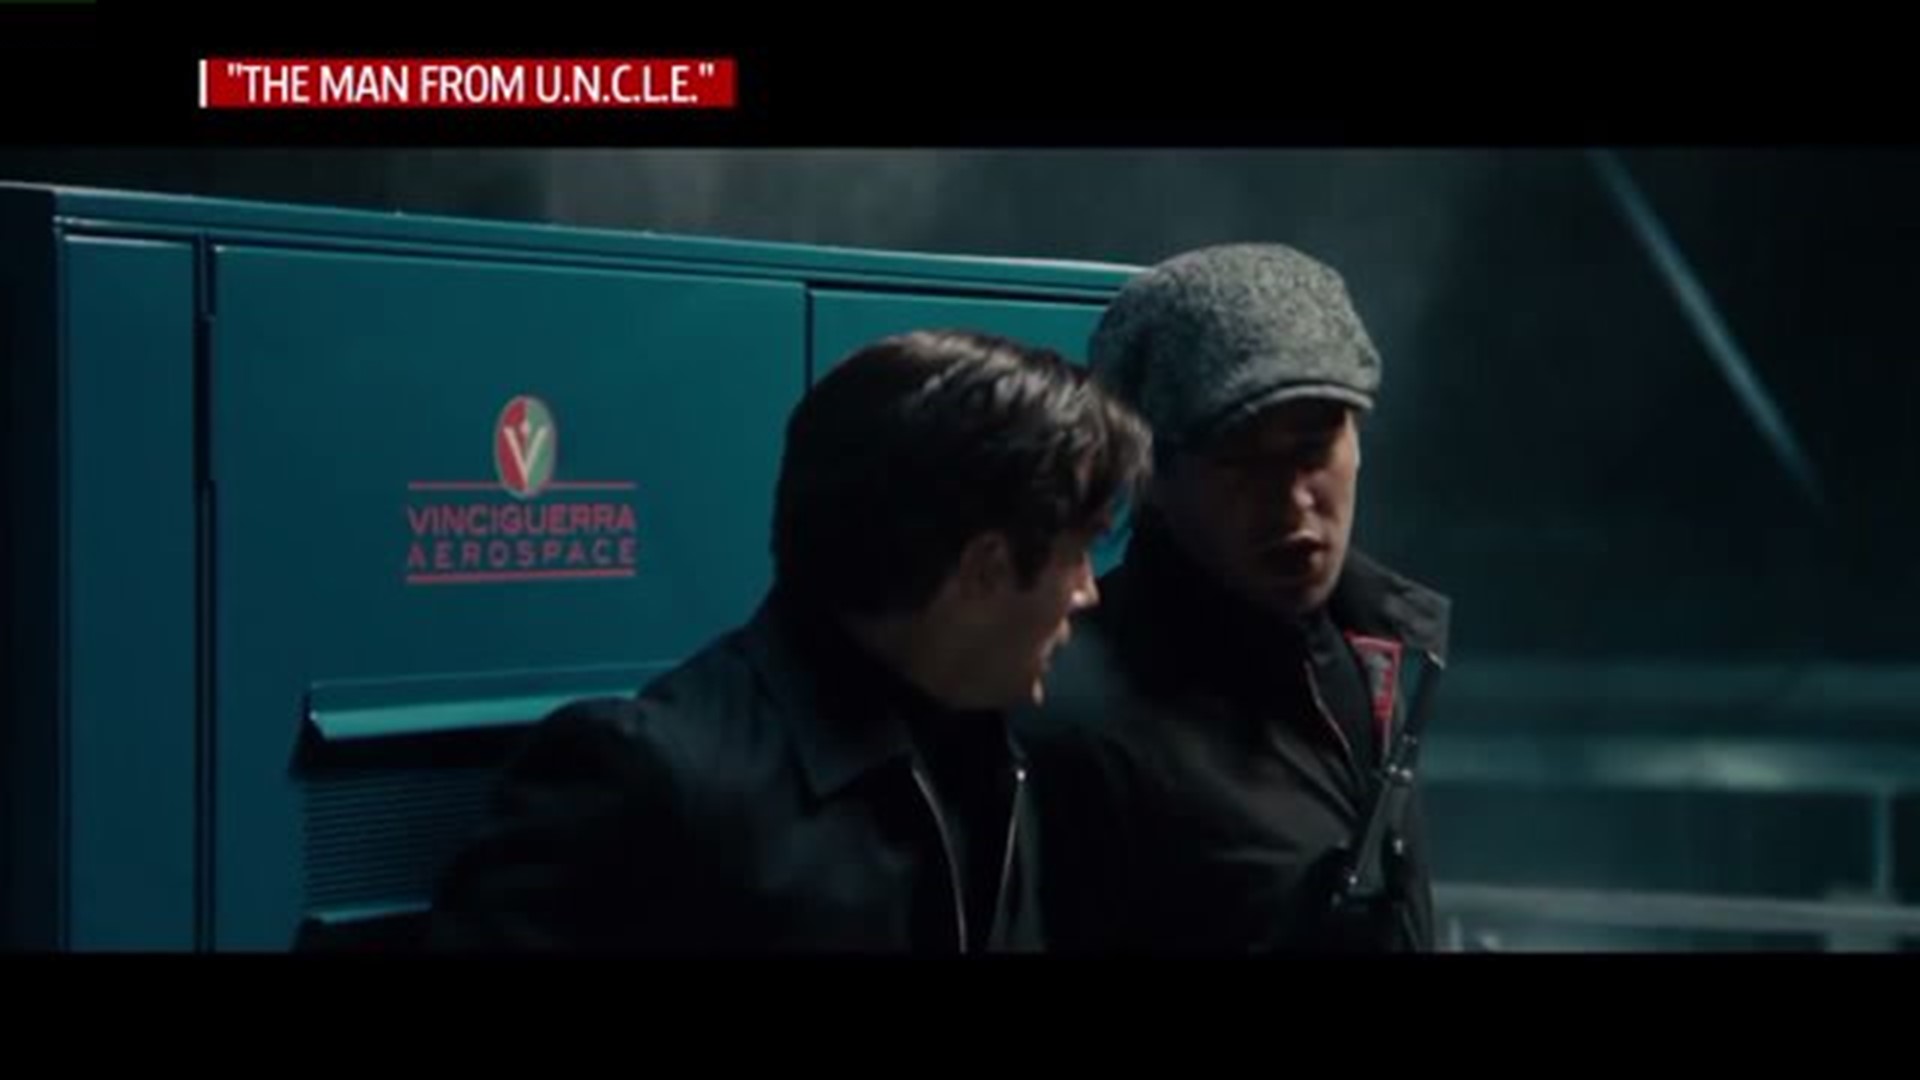 Steve At The Movies: "The Man from U.N.C.L.E."